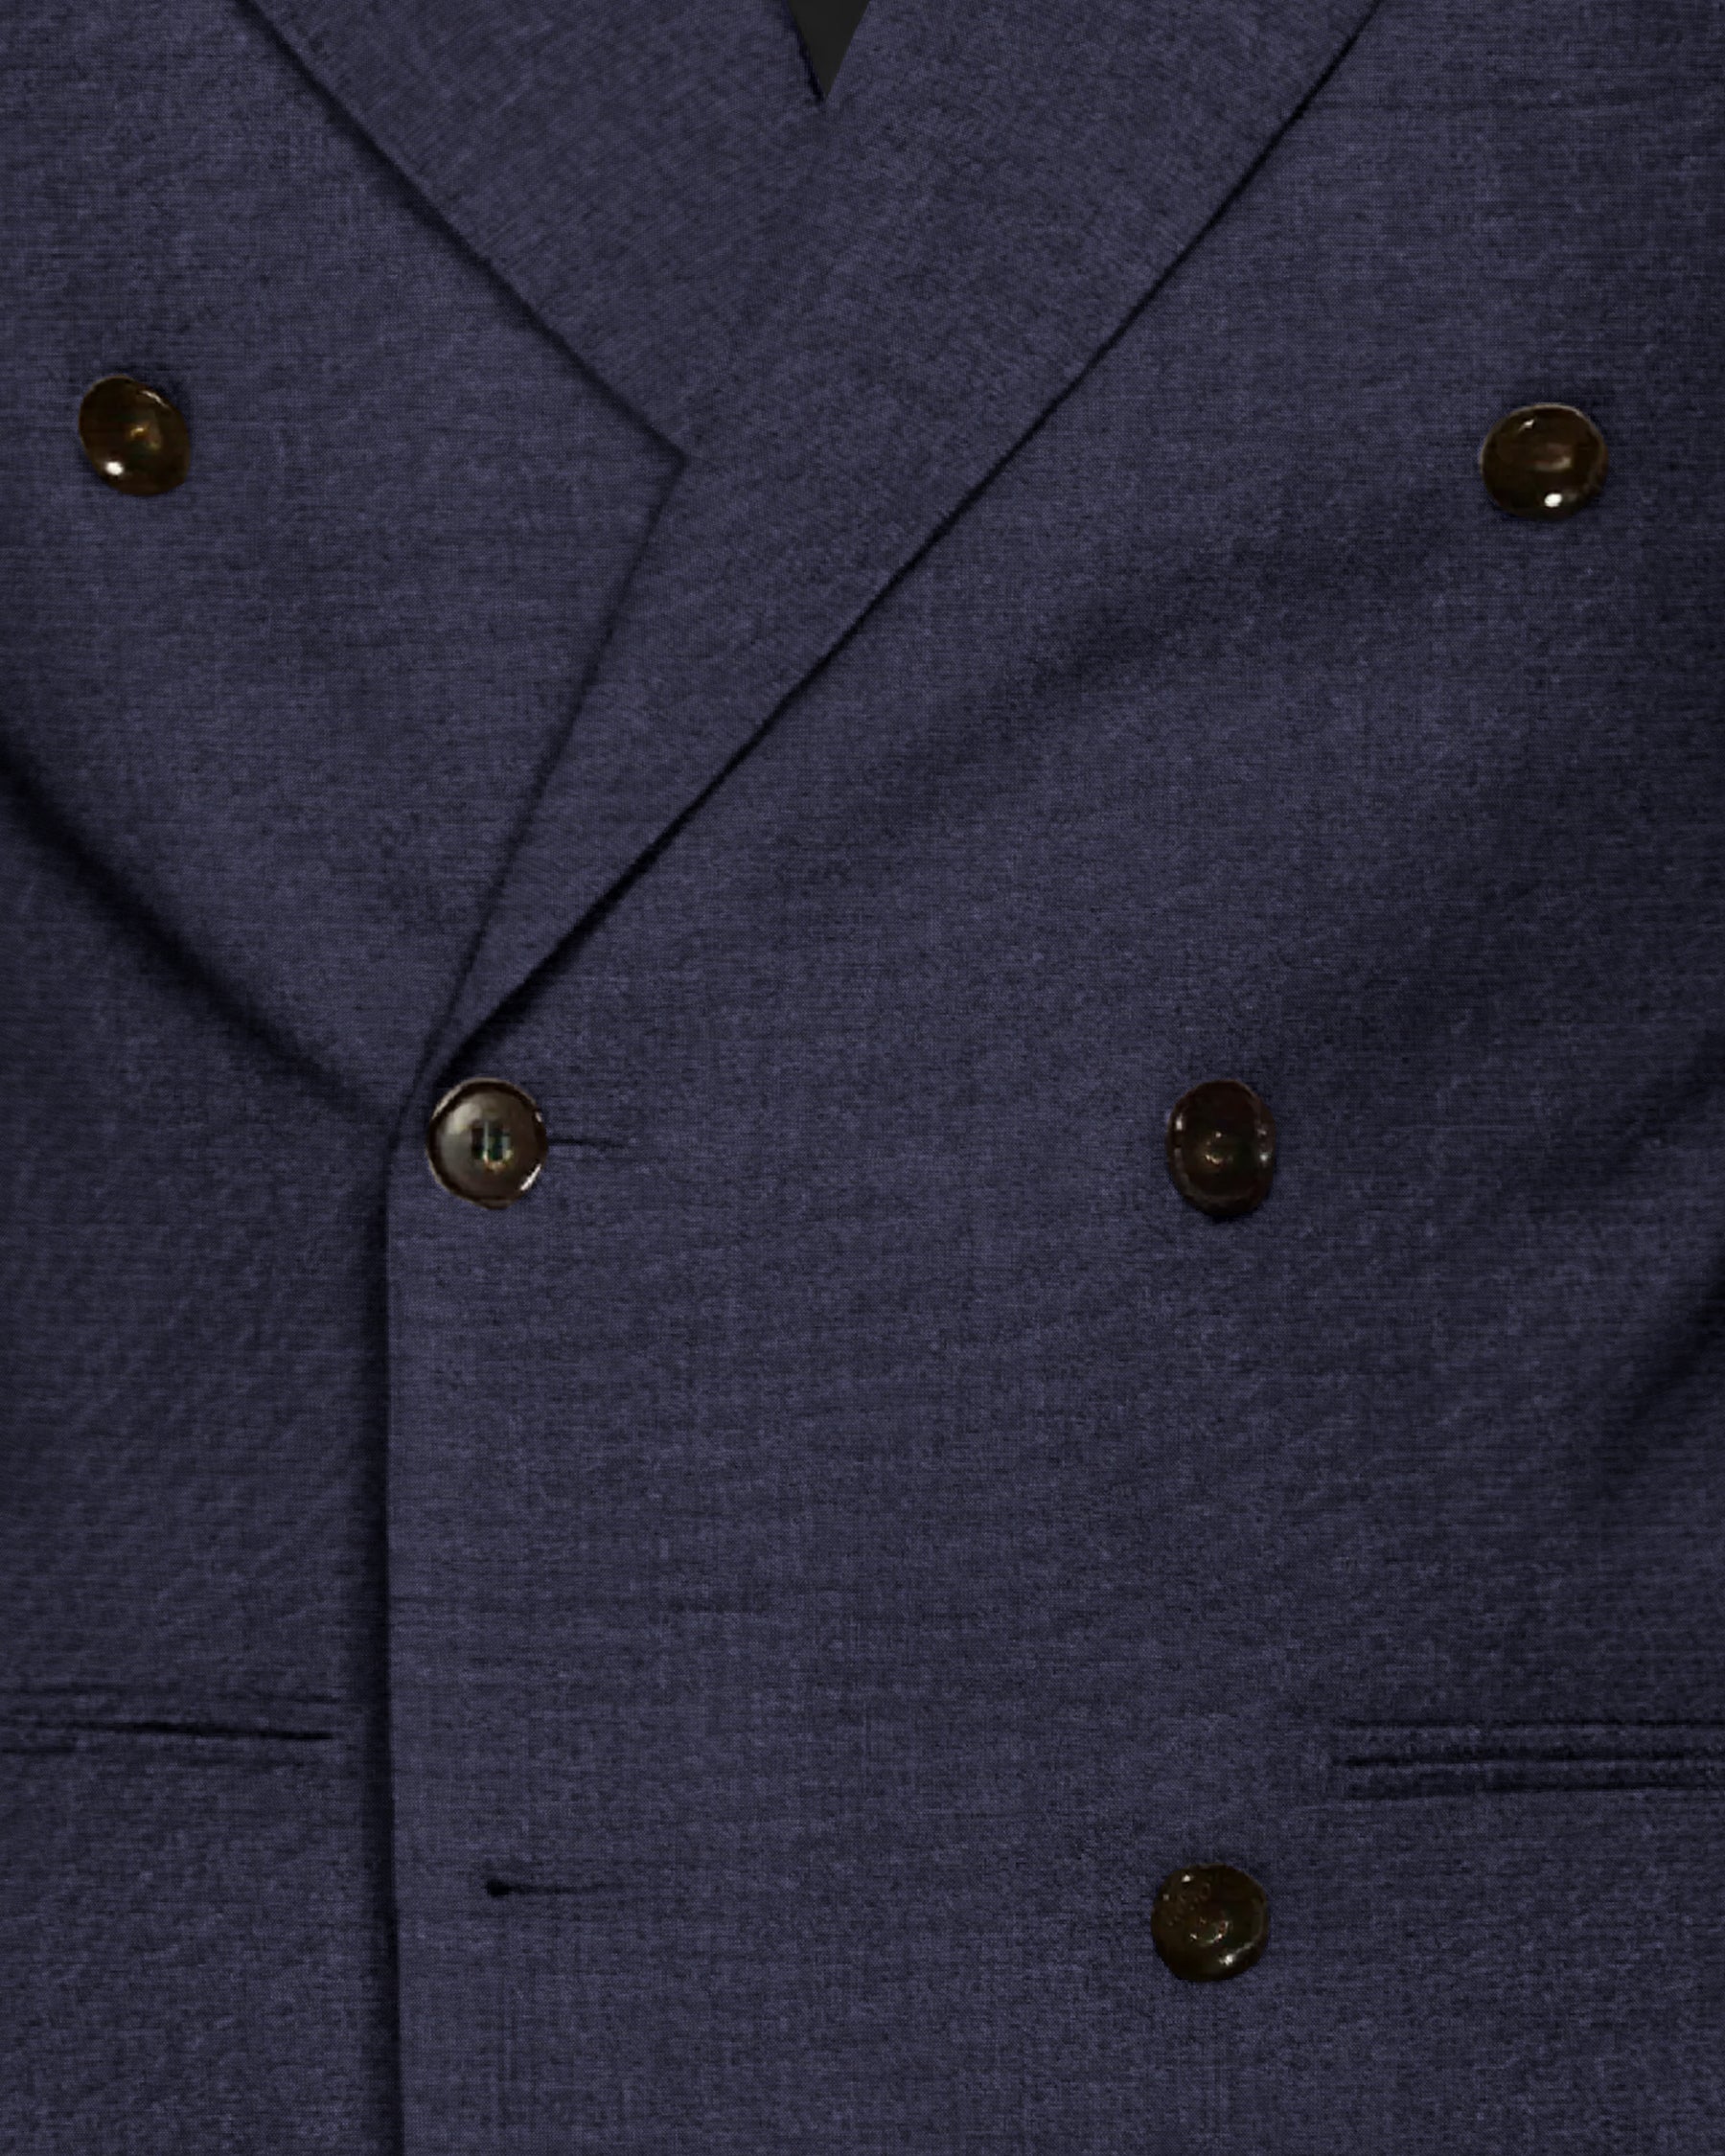 Navy Wool Blend Double Breasted Blazer